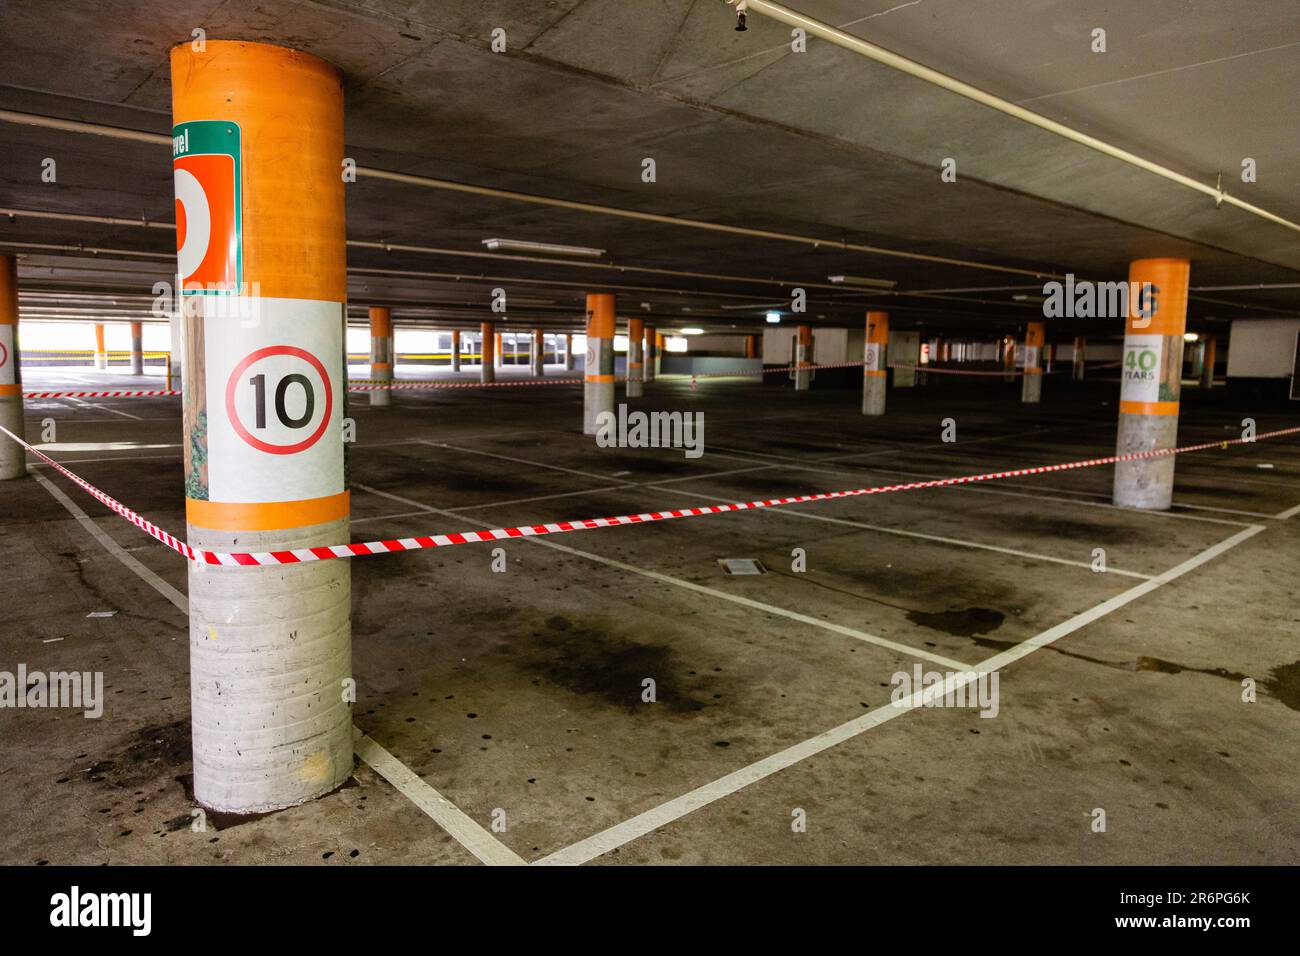 MELBOURNE, AUSTRALIA - APRIL 29: The carpark at Greensborough Plaza has been taped off due to COVID 19 on 29 April, 2020 in Melbourne, Australia. Stock Photo